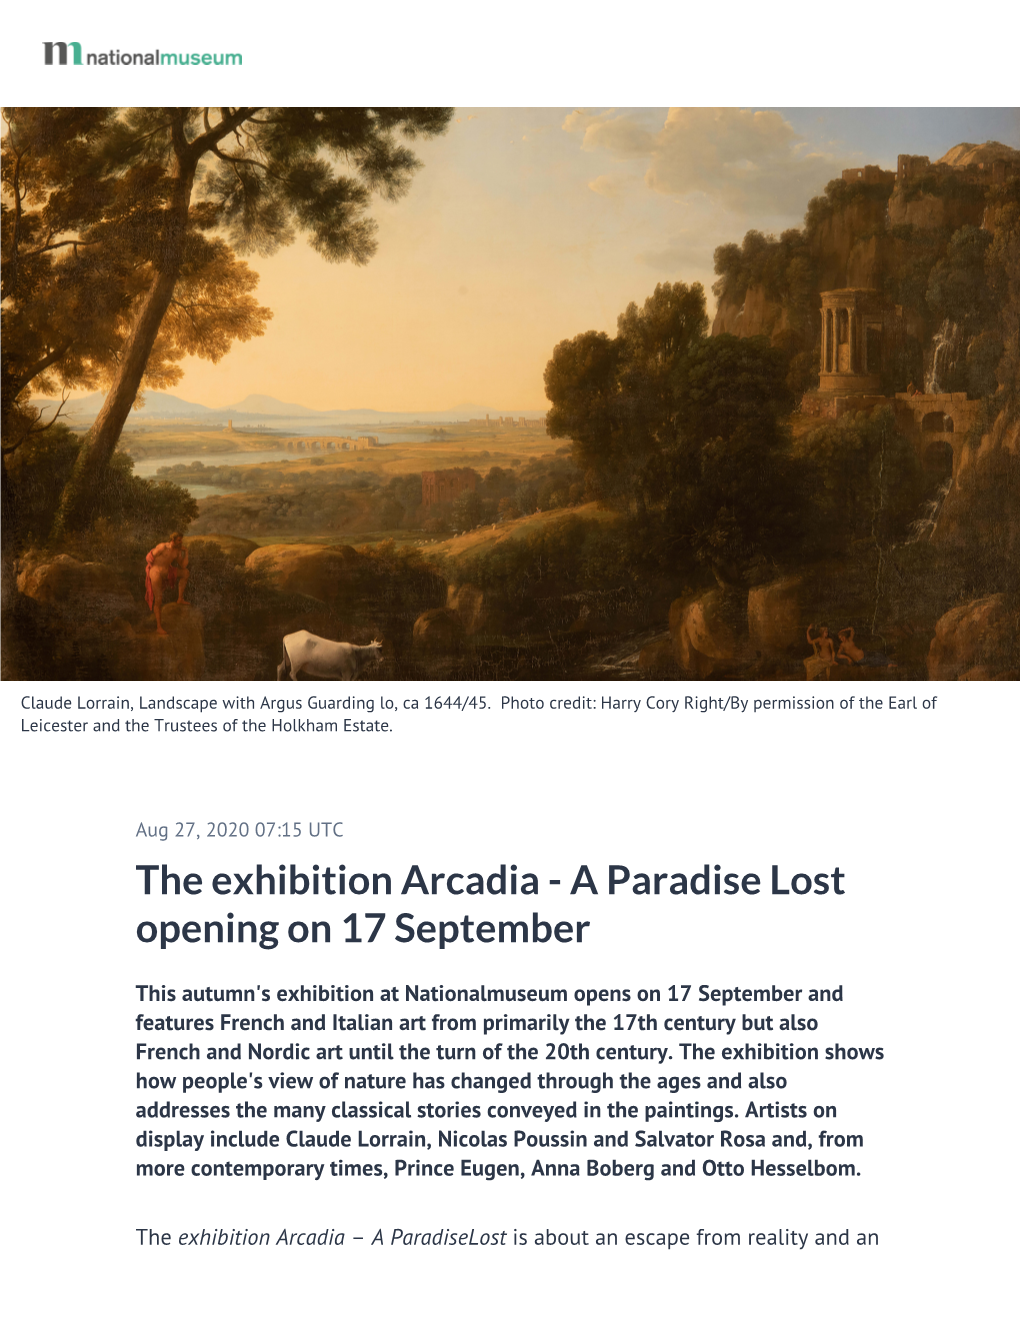 The Exhibition Arcadia - a Paradise Lost Opening on 17 September